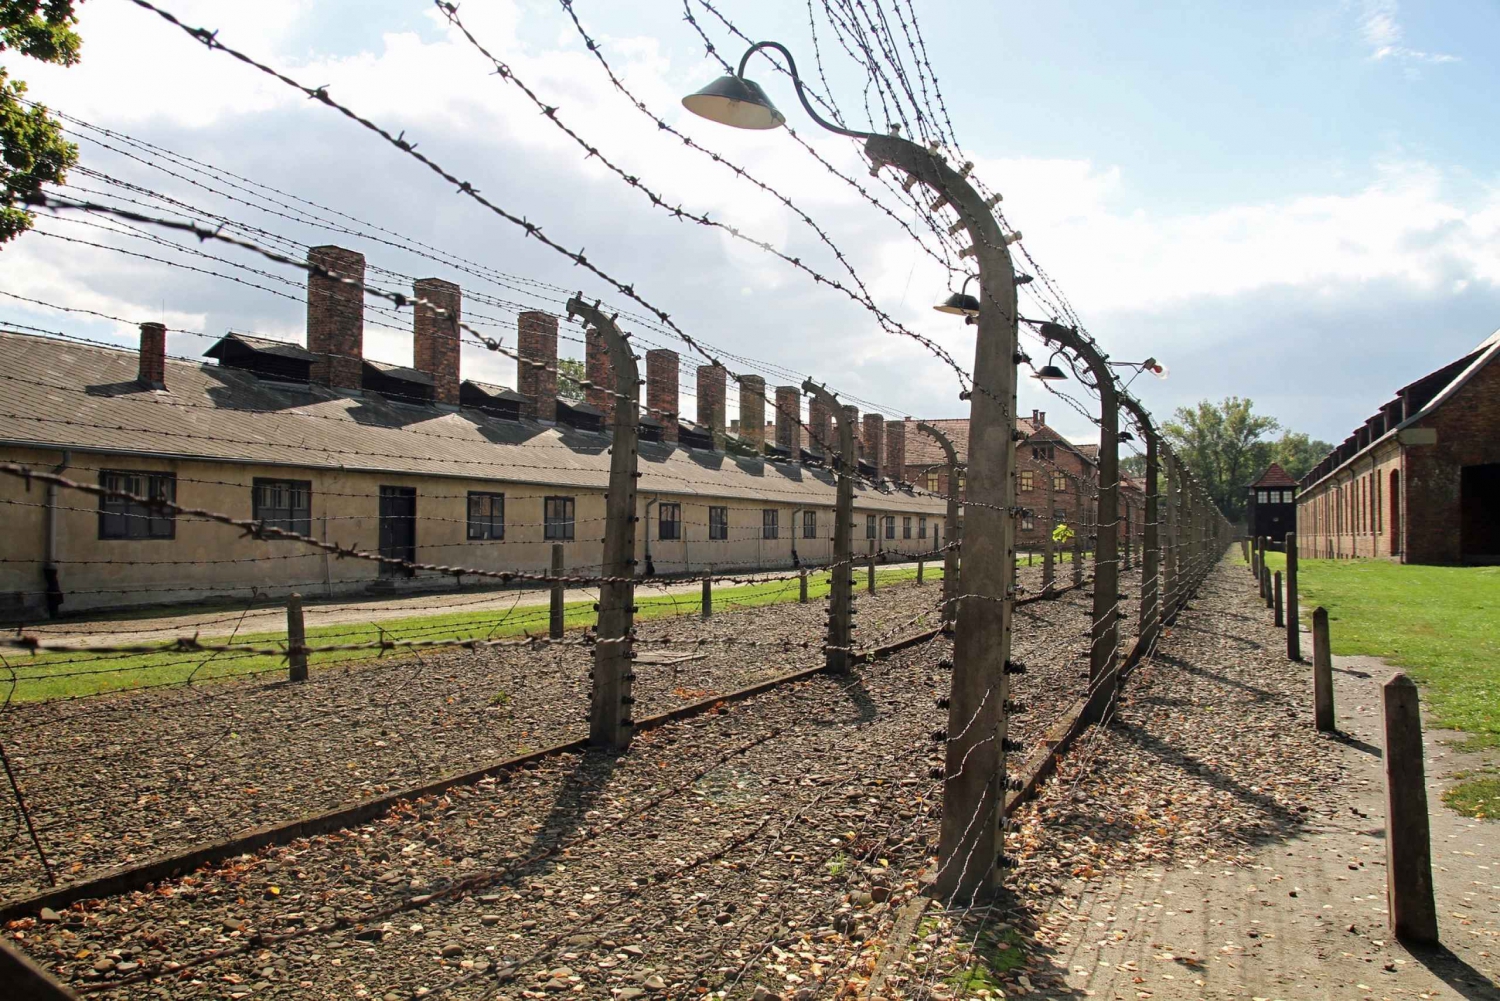 Auschwitz-Birkenau and Krakow Old Town Guided Tour